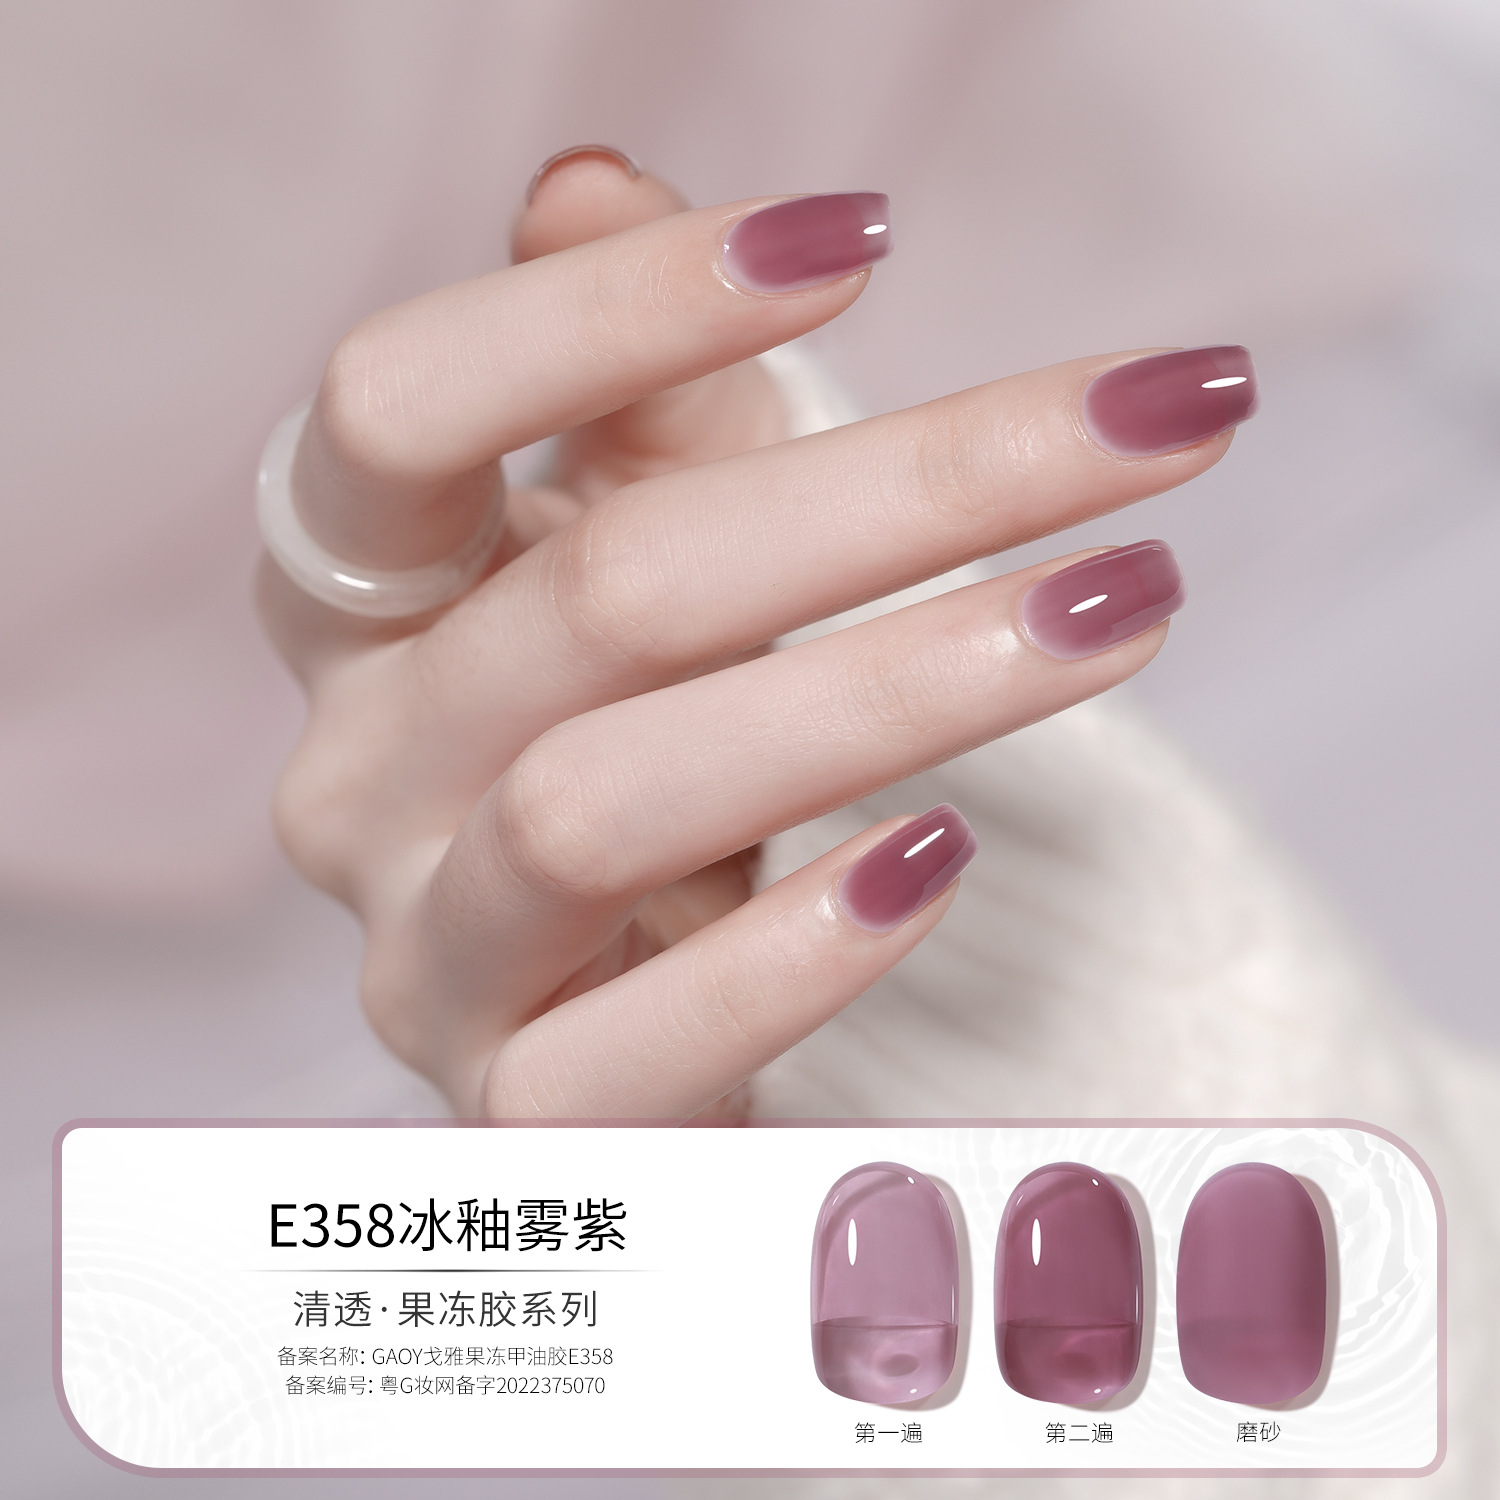 Goya Jelly Nail Gel E373 New Ice Transparent Color Milk Tea Color Purple Naked Pink Transparent Color Nail Gel For Nail Shops